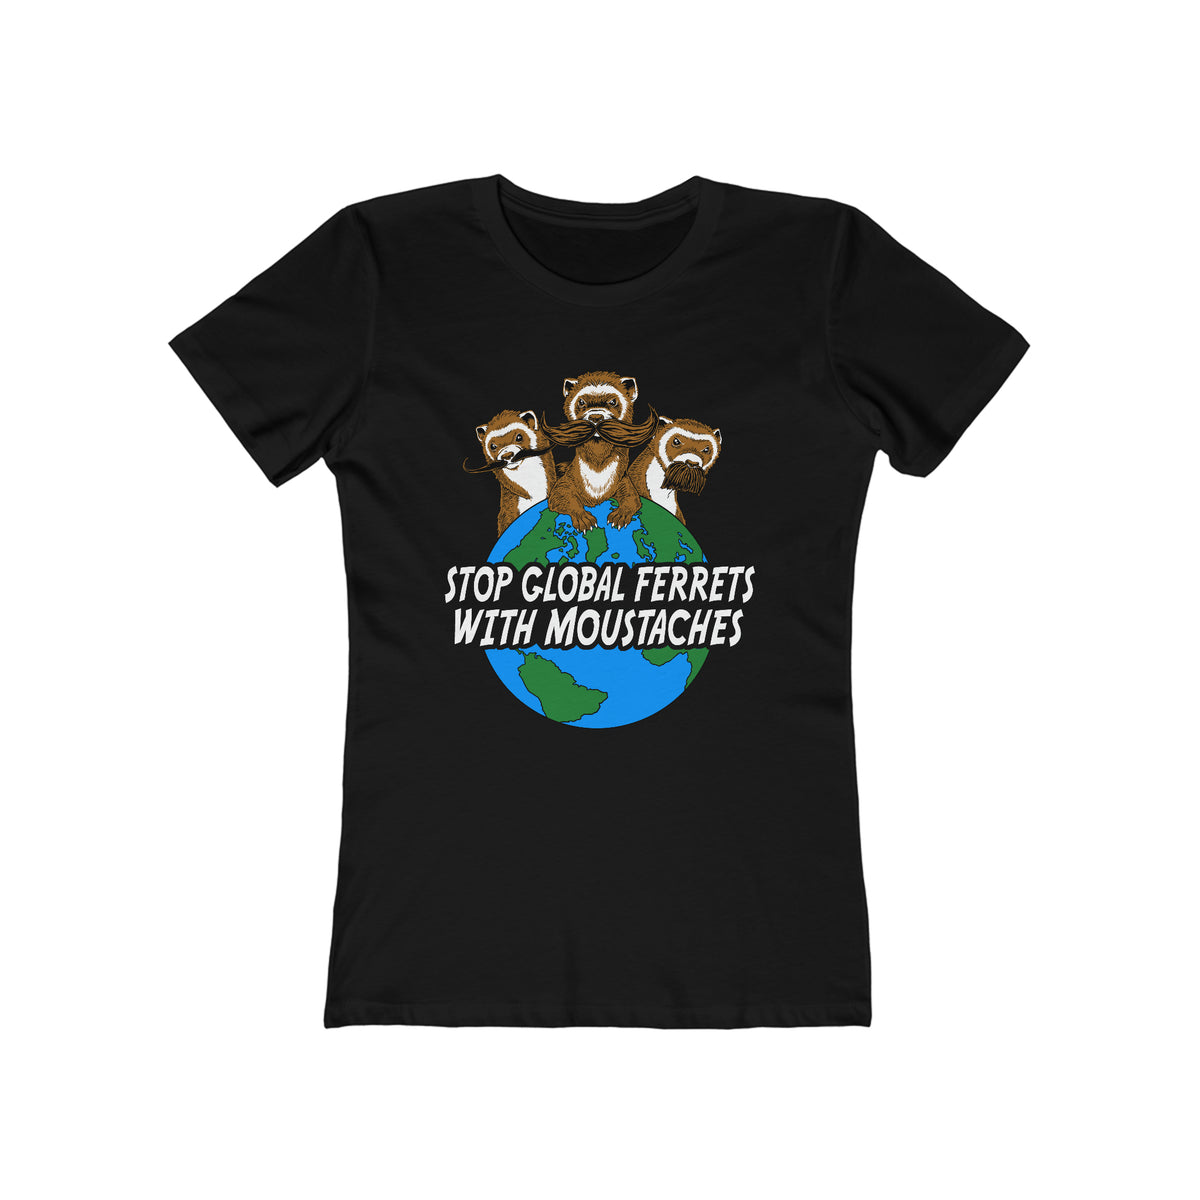 Stop Global Ferrets With Moustaches  - Women’s T-Shirt